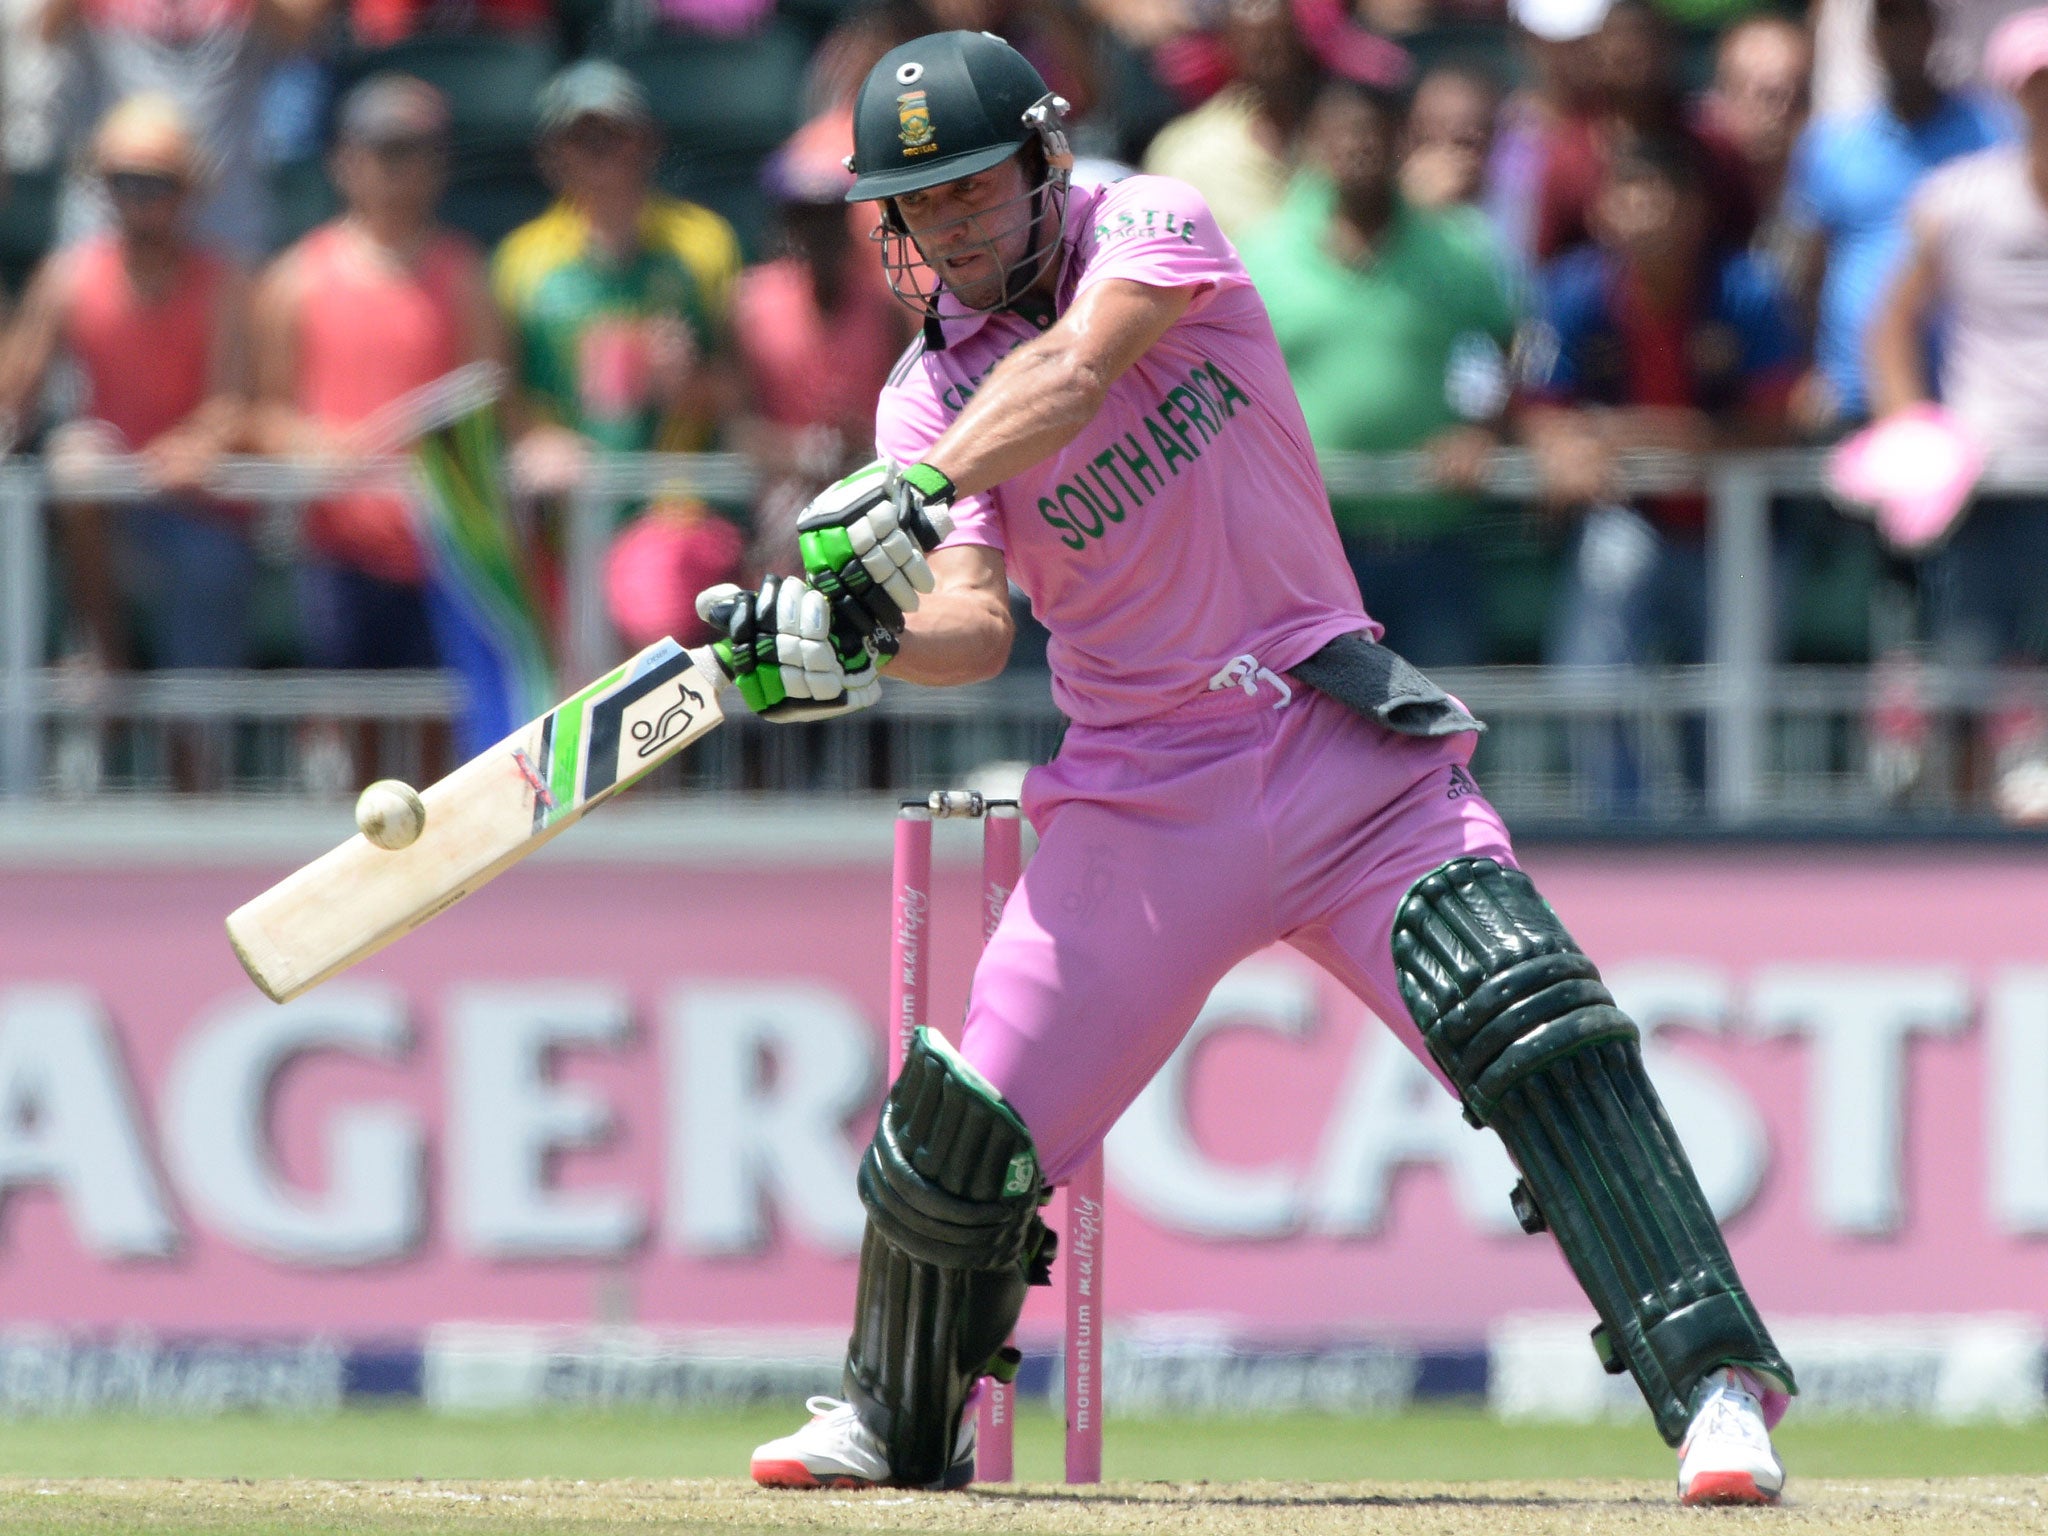 AB de Villiers goes into Cricket World Cup in superb form